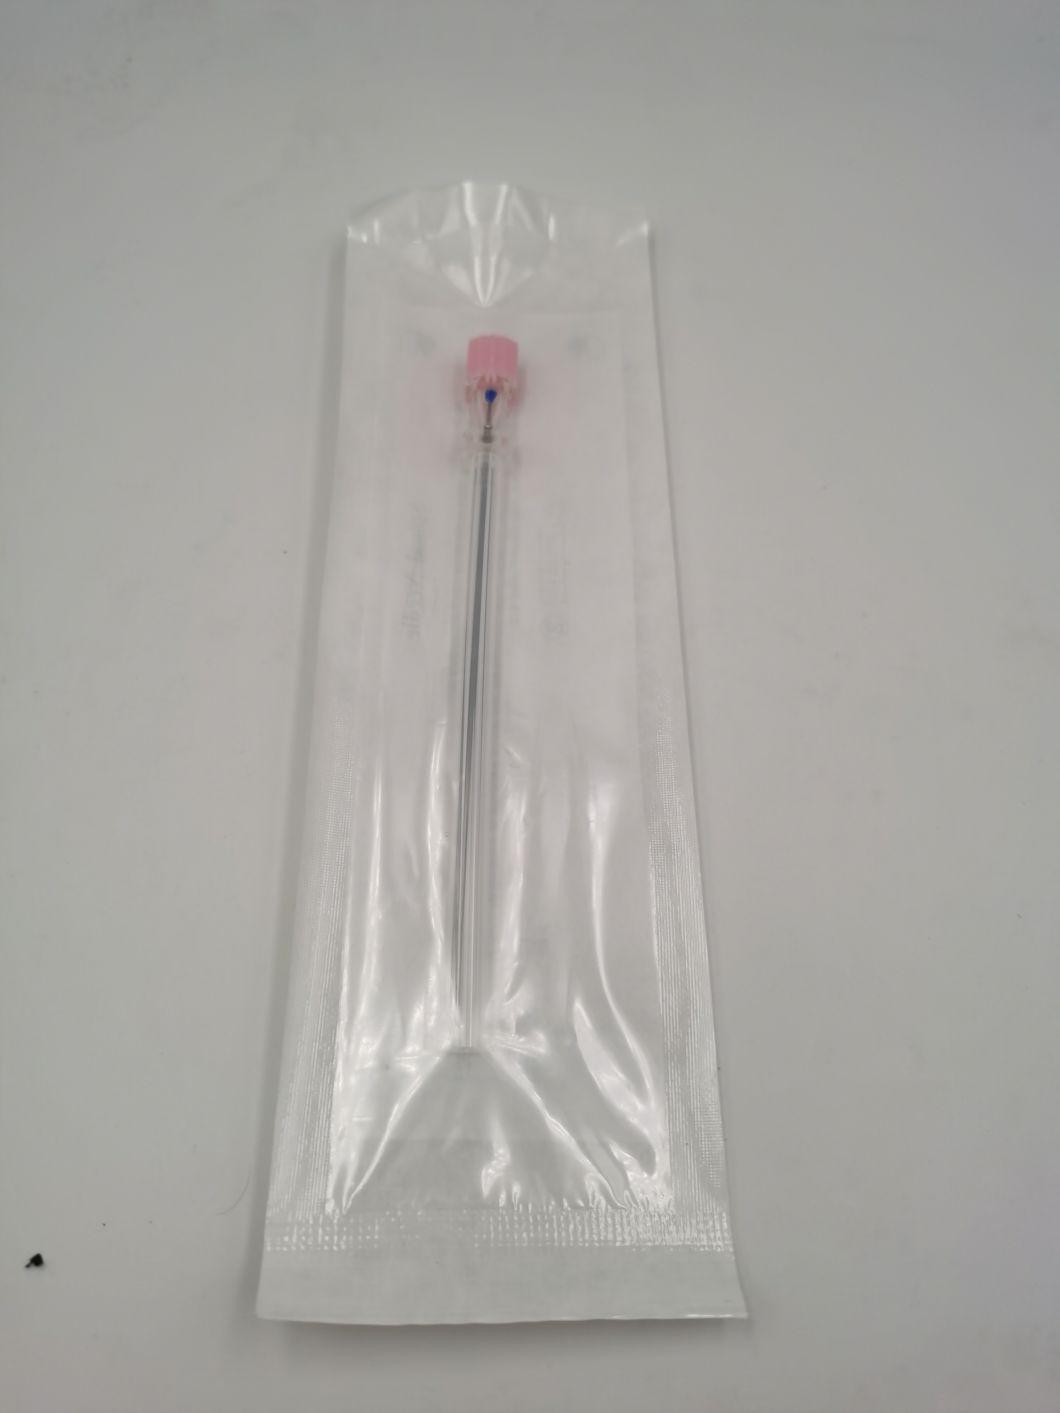 Manufacture Supply Medical Spinal Needle with Pencil or Qunicke Type